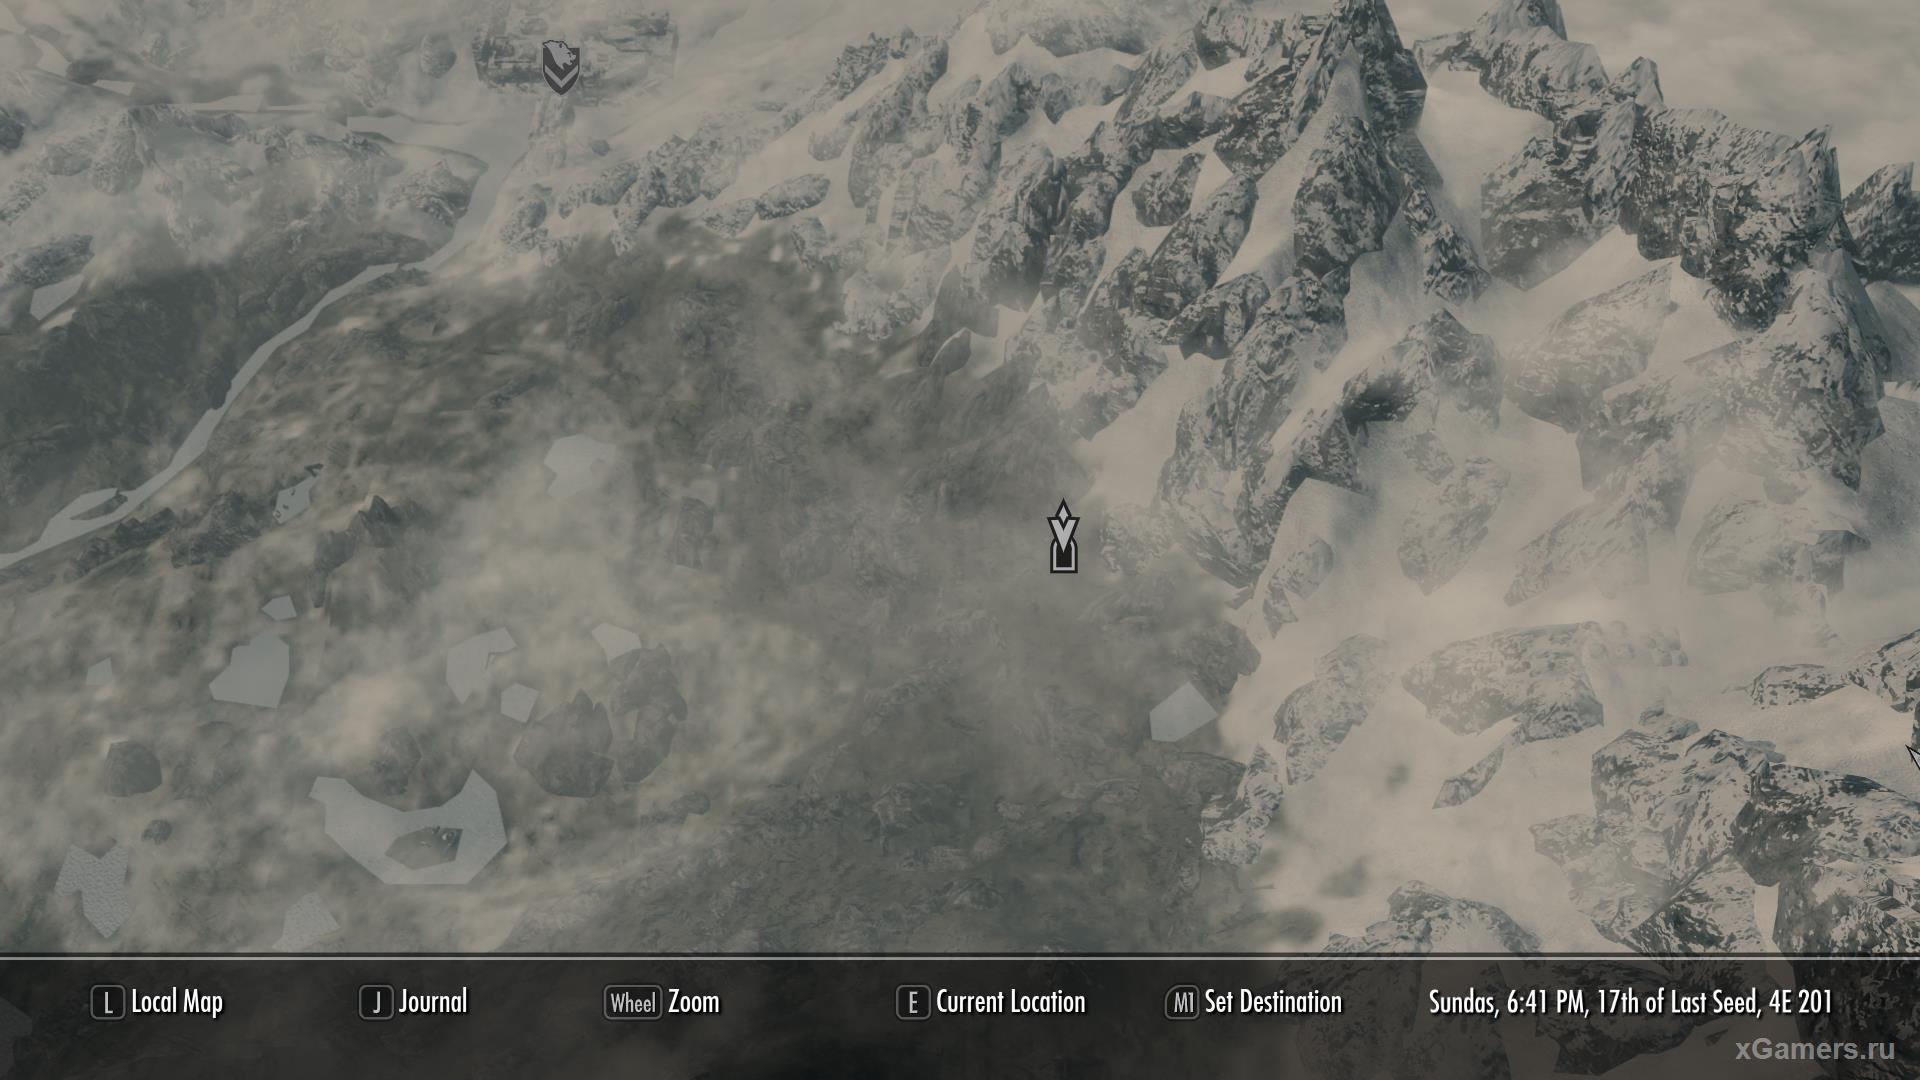 Quest - Skyrim Revealing Unseen on the map